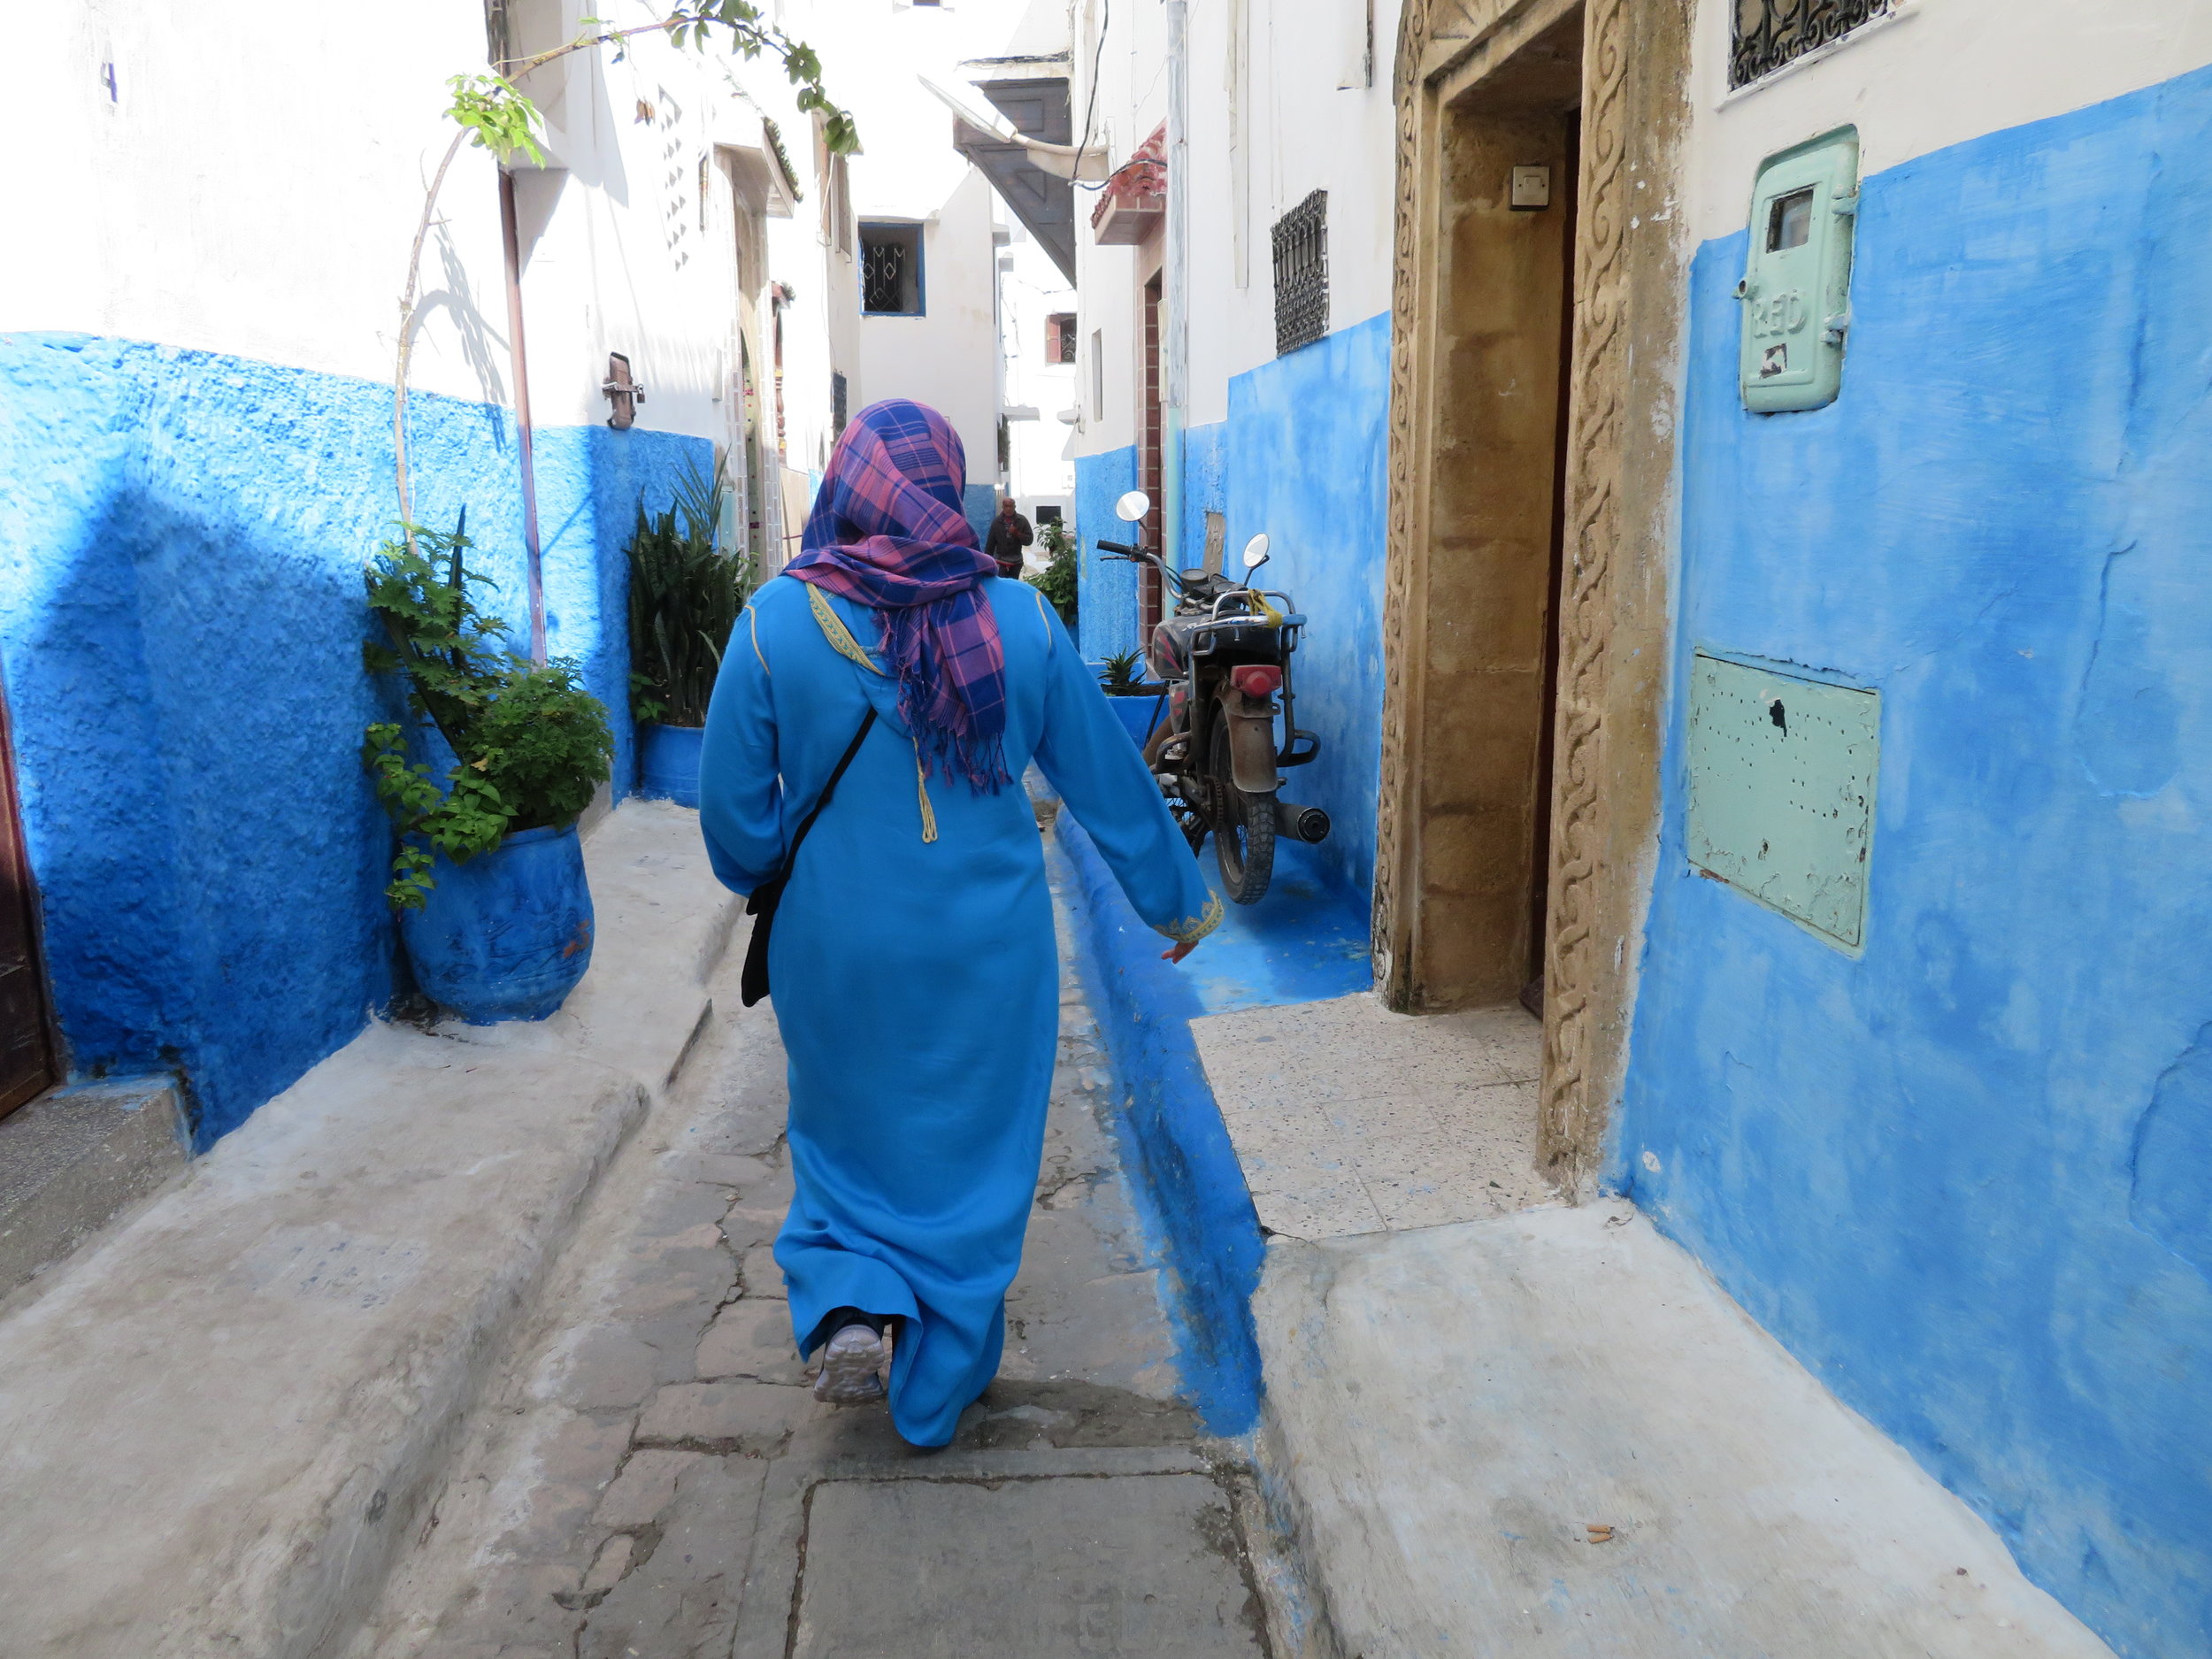 Strolling the medina of the Blue City...